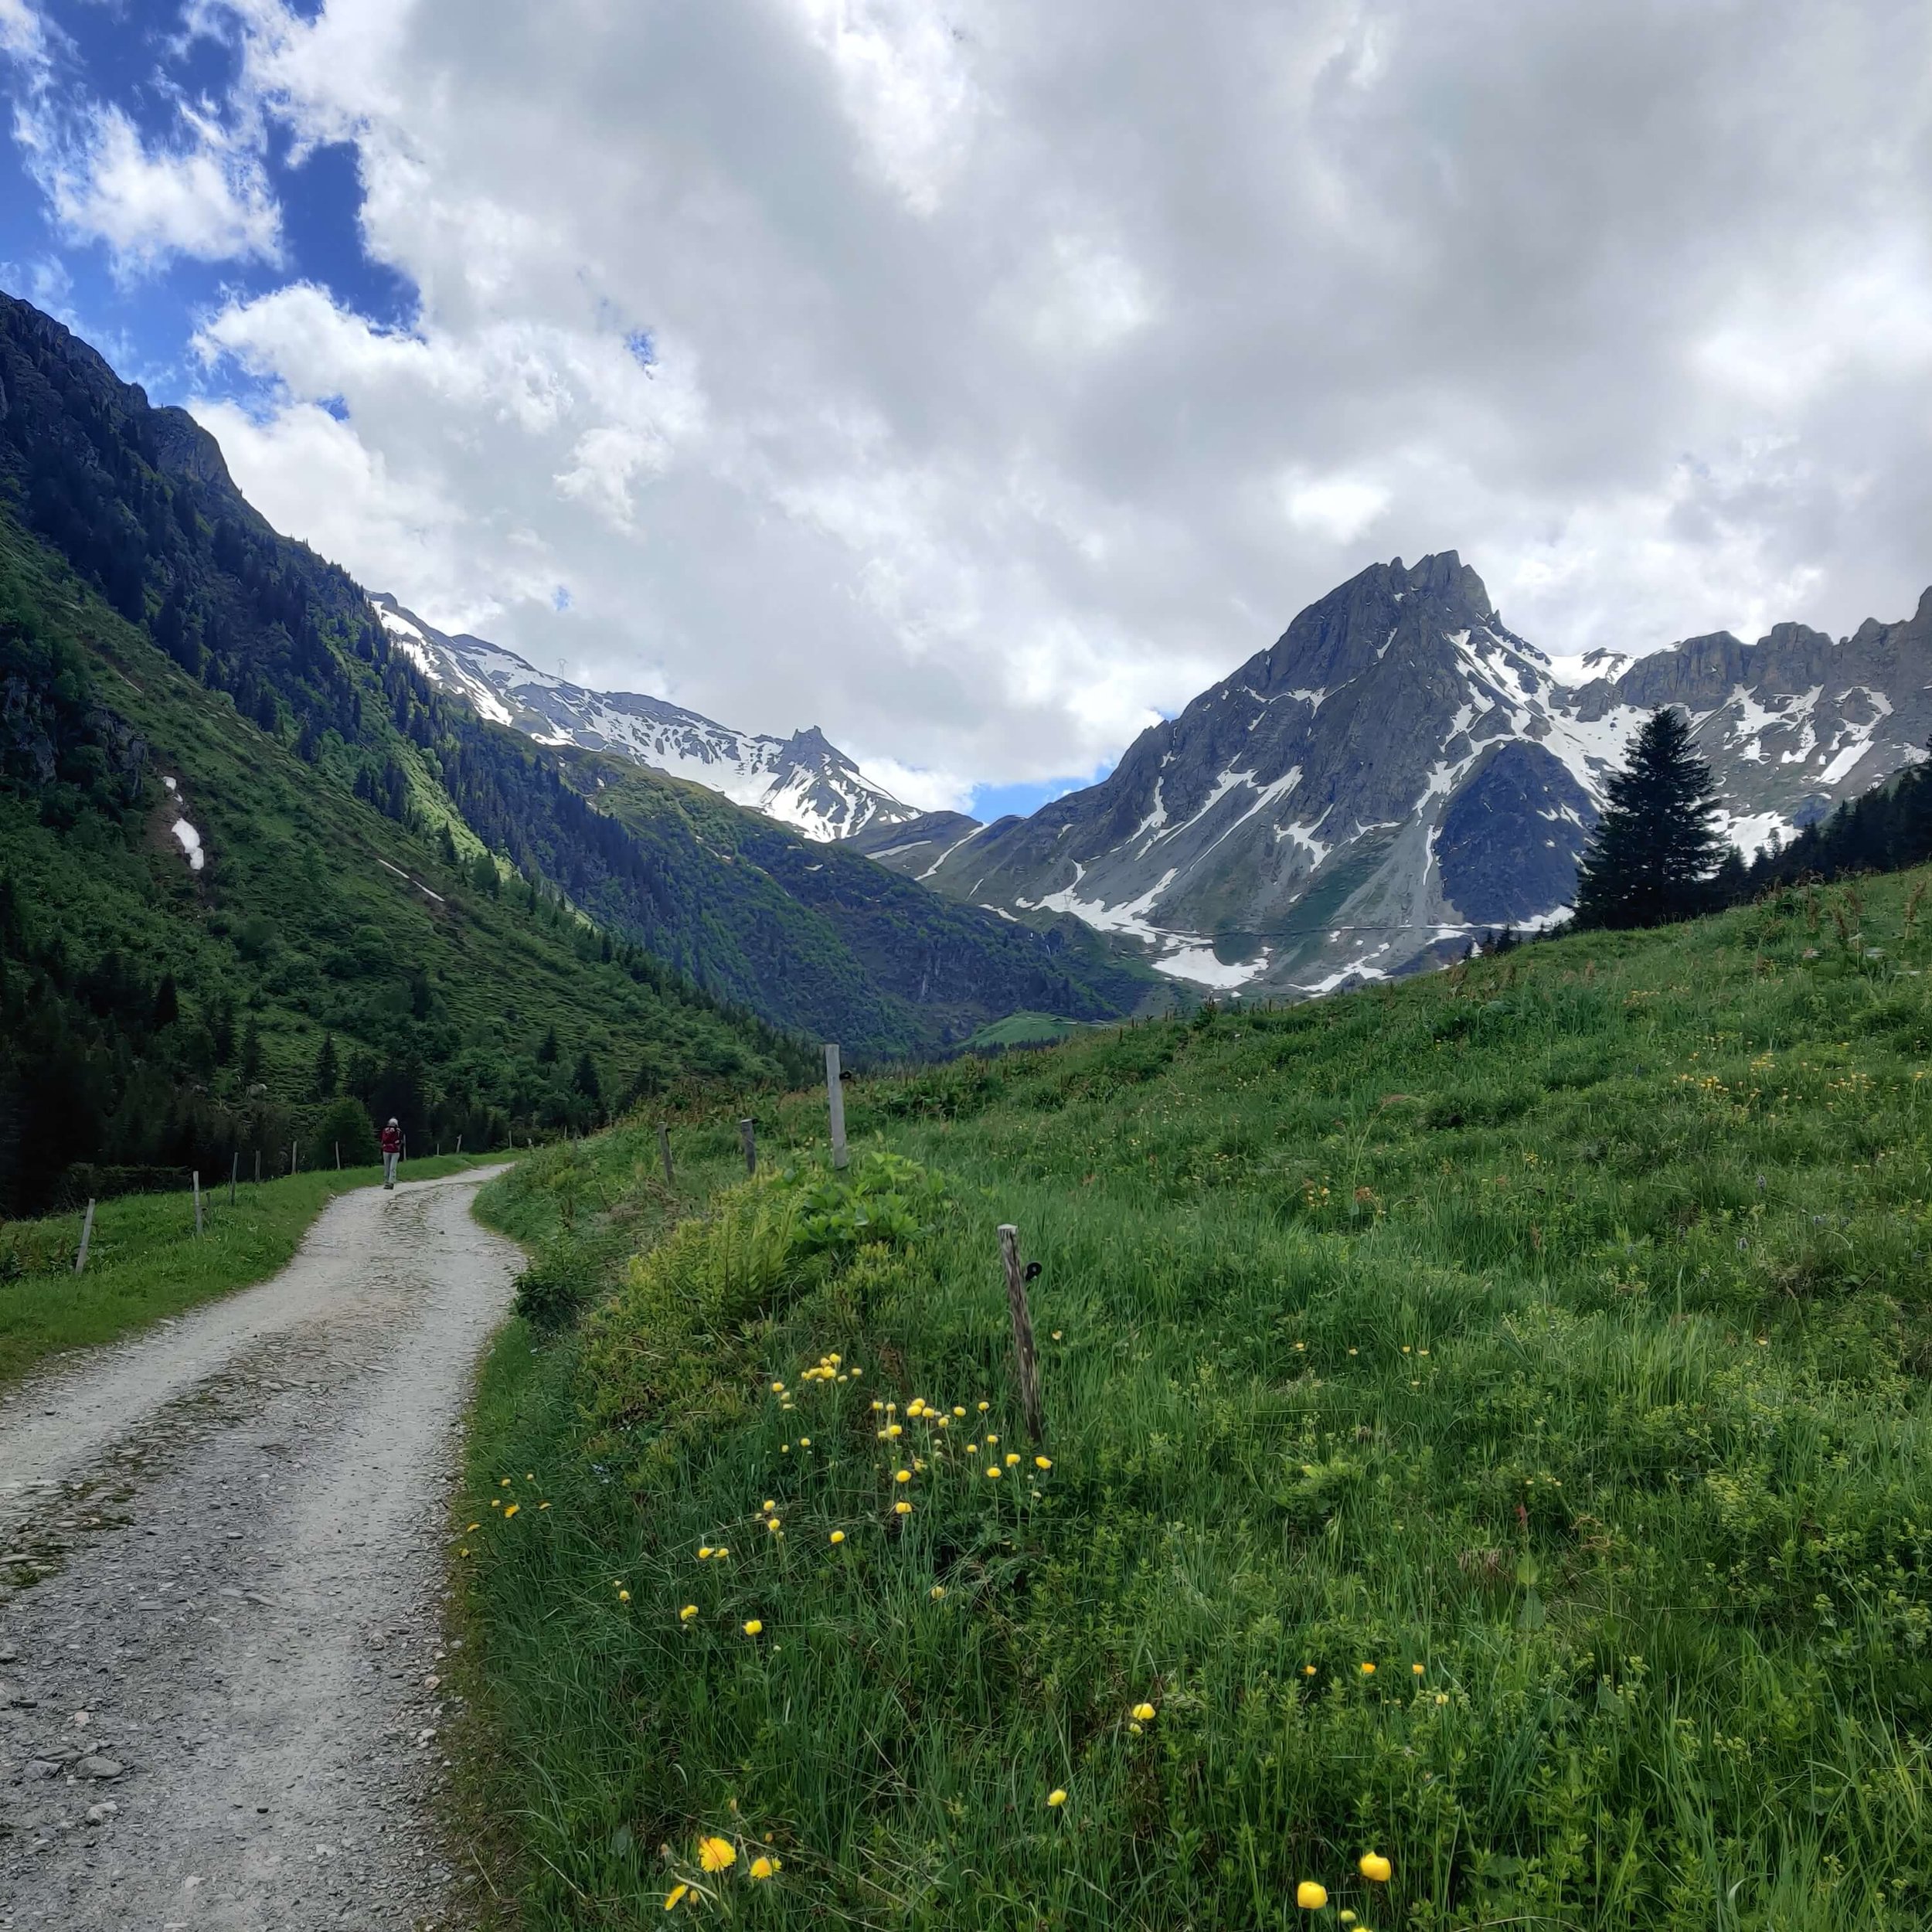 Looking towards Col du Bonhomme from trail between Nant Borrant and Refuge de la Barma_29 May 2022_resized.jpg